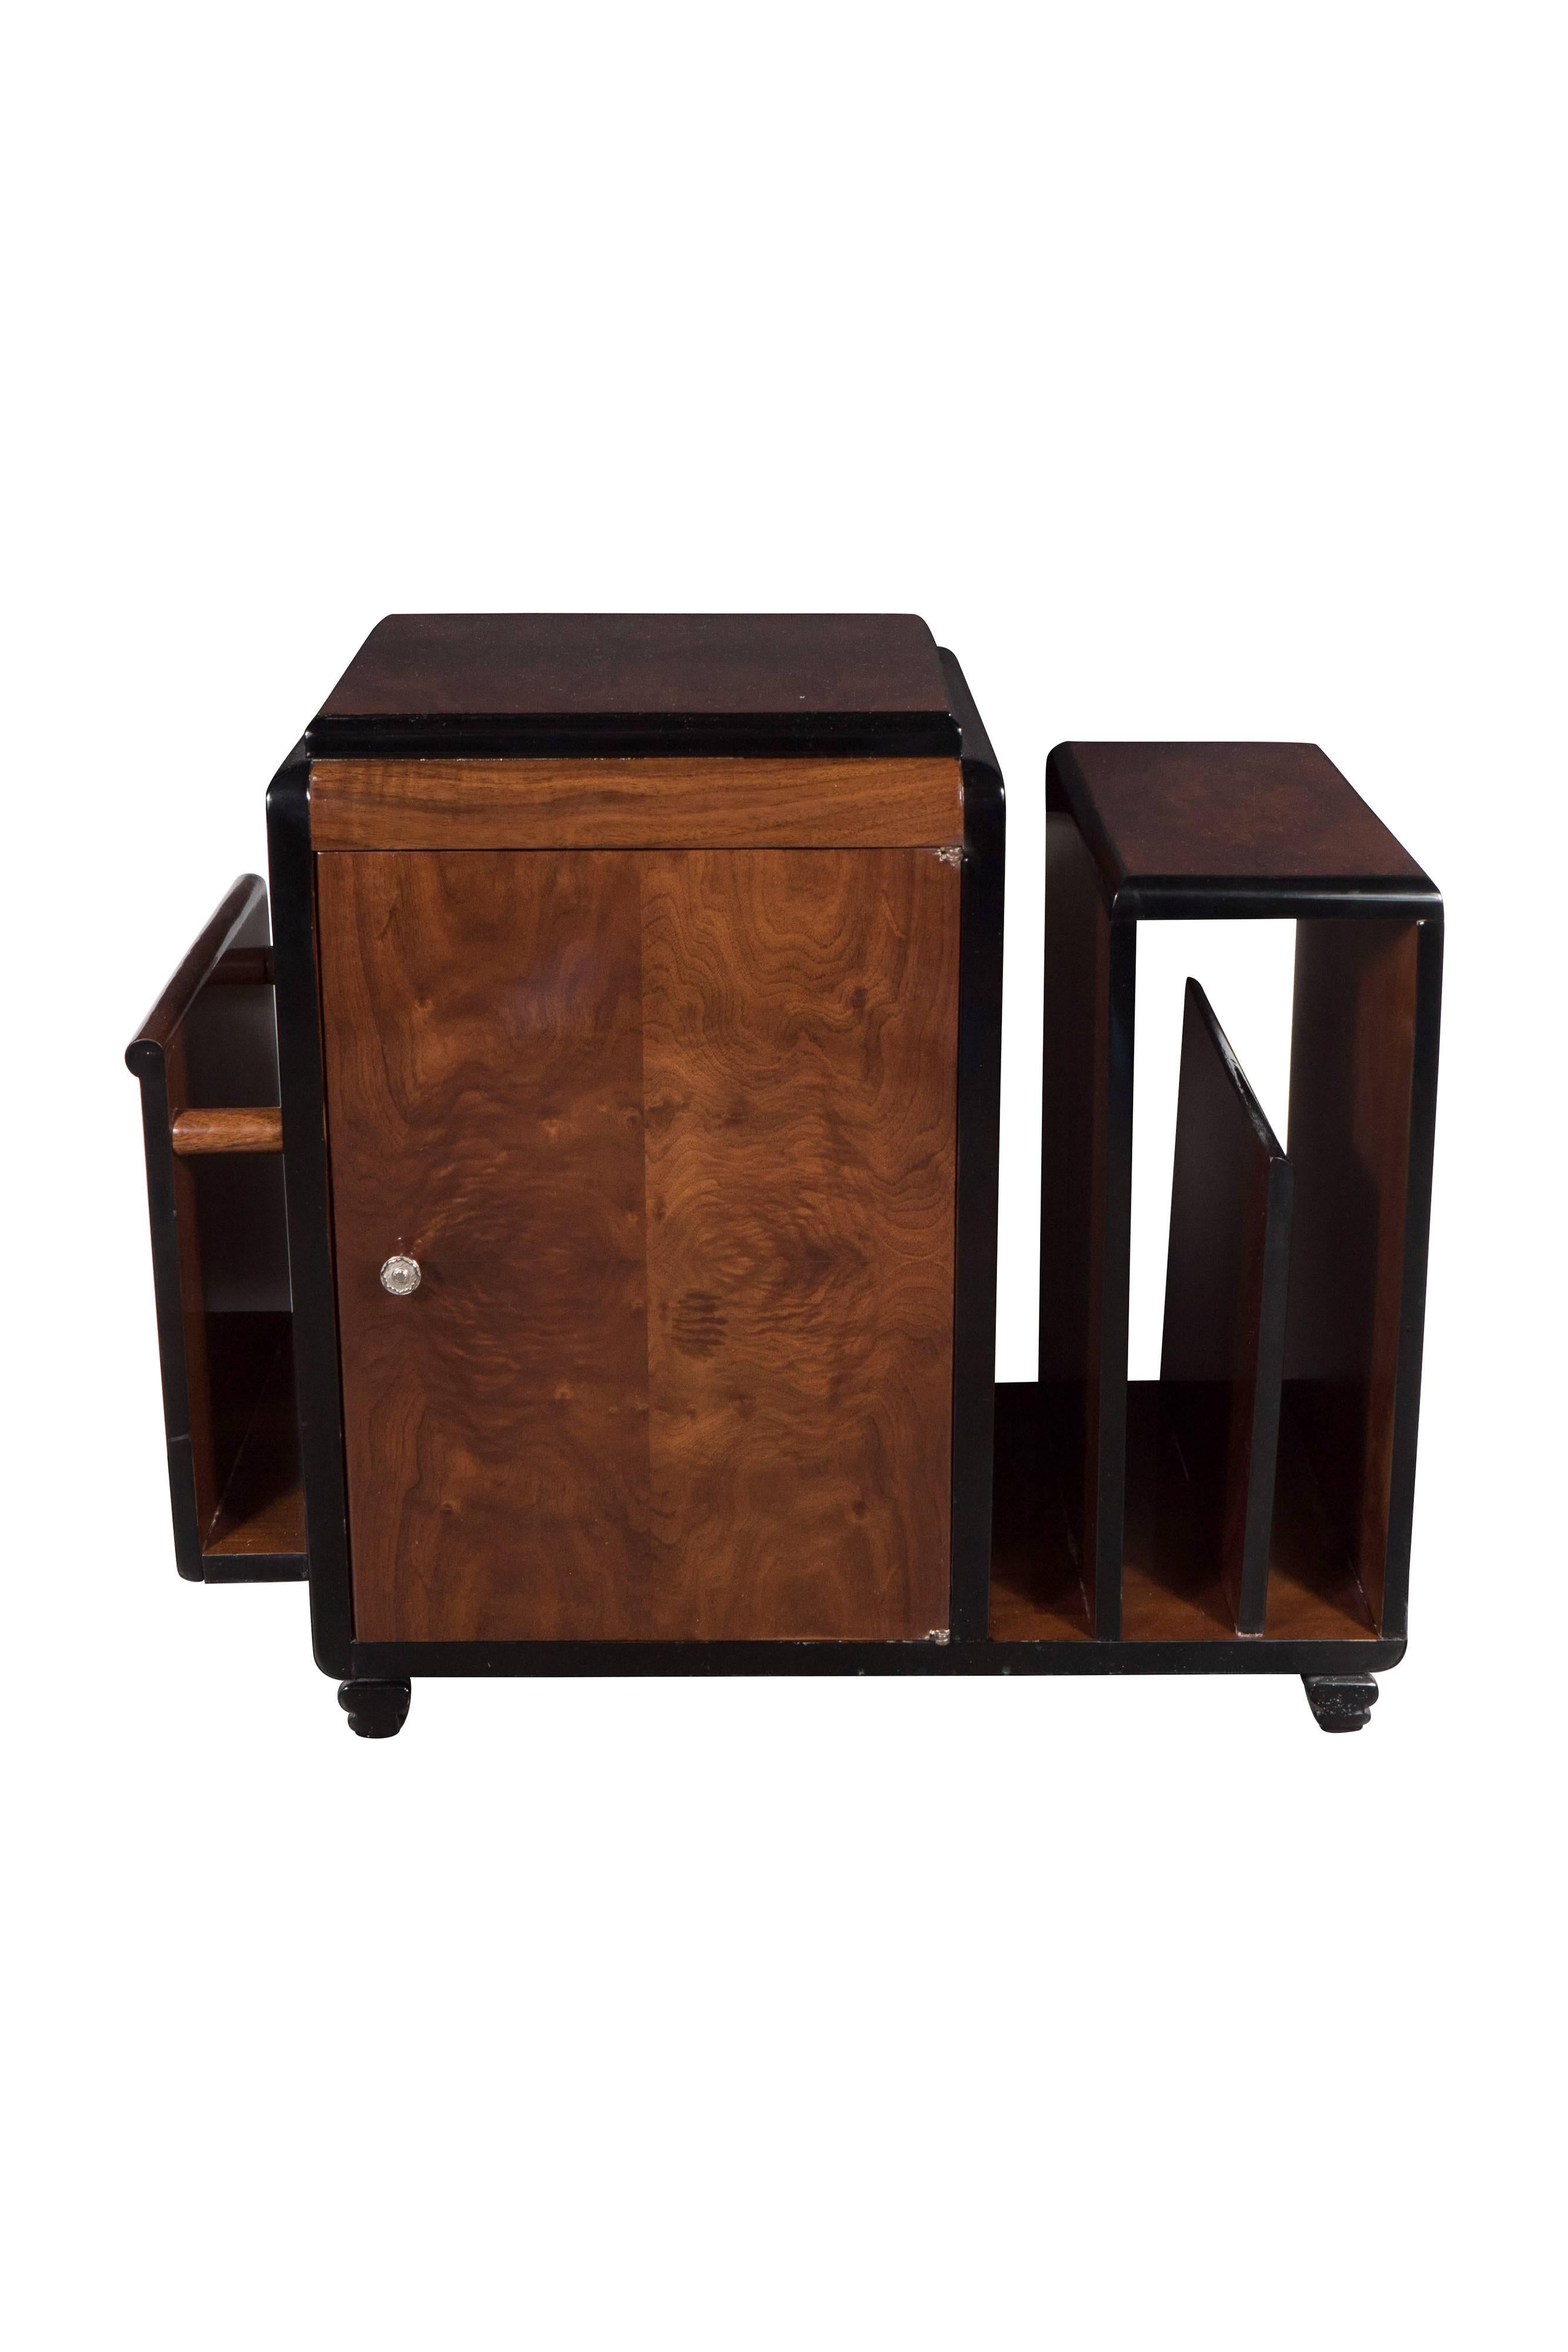 Lacquer Art Deco Skyscraper Style Bookmatched Burled Walnut Magazine Stand/End Table